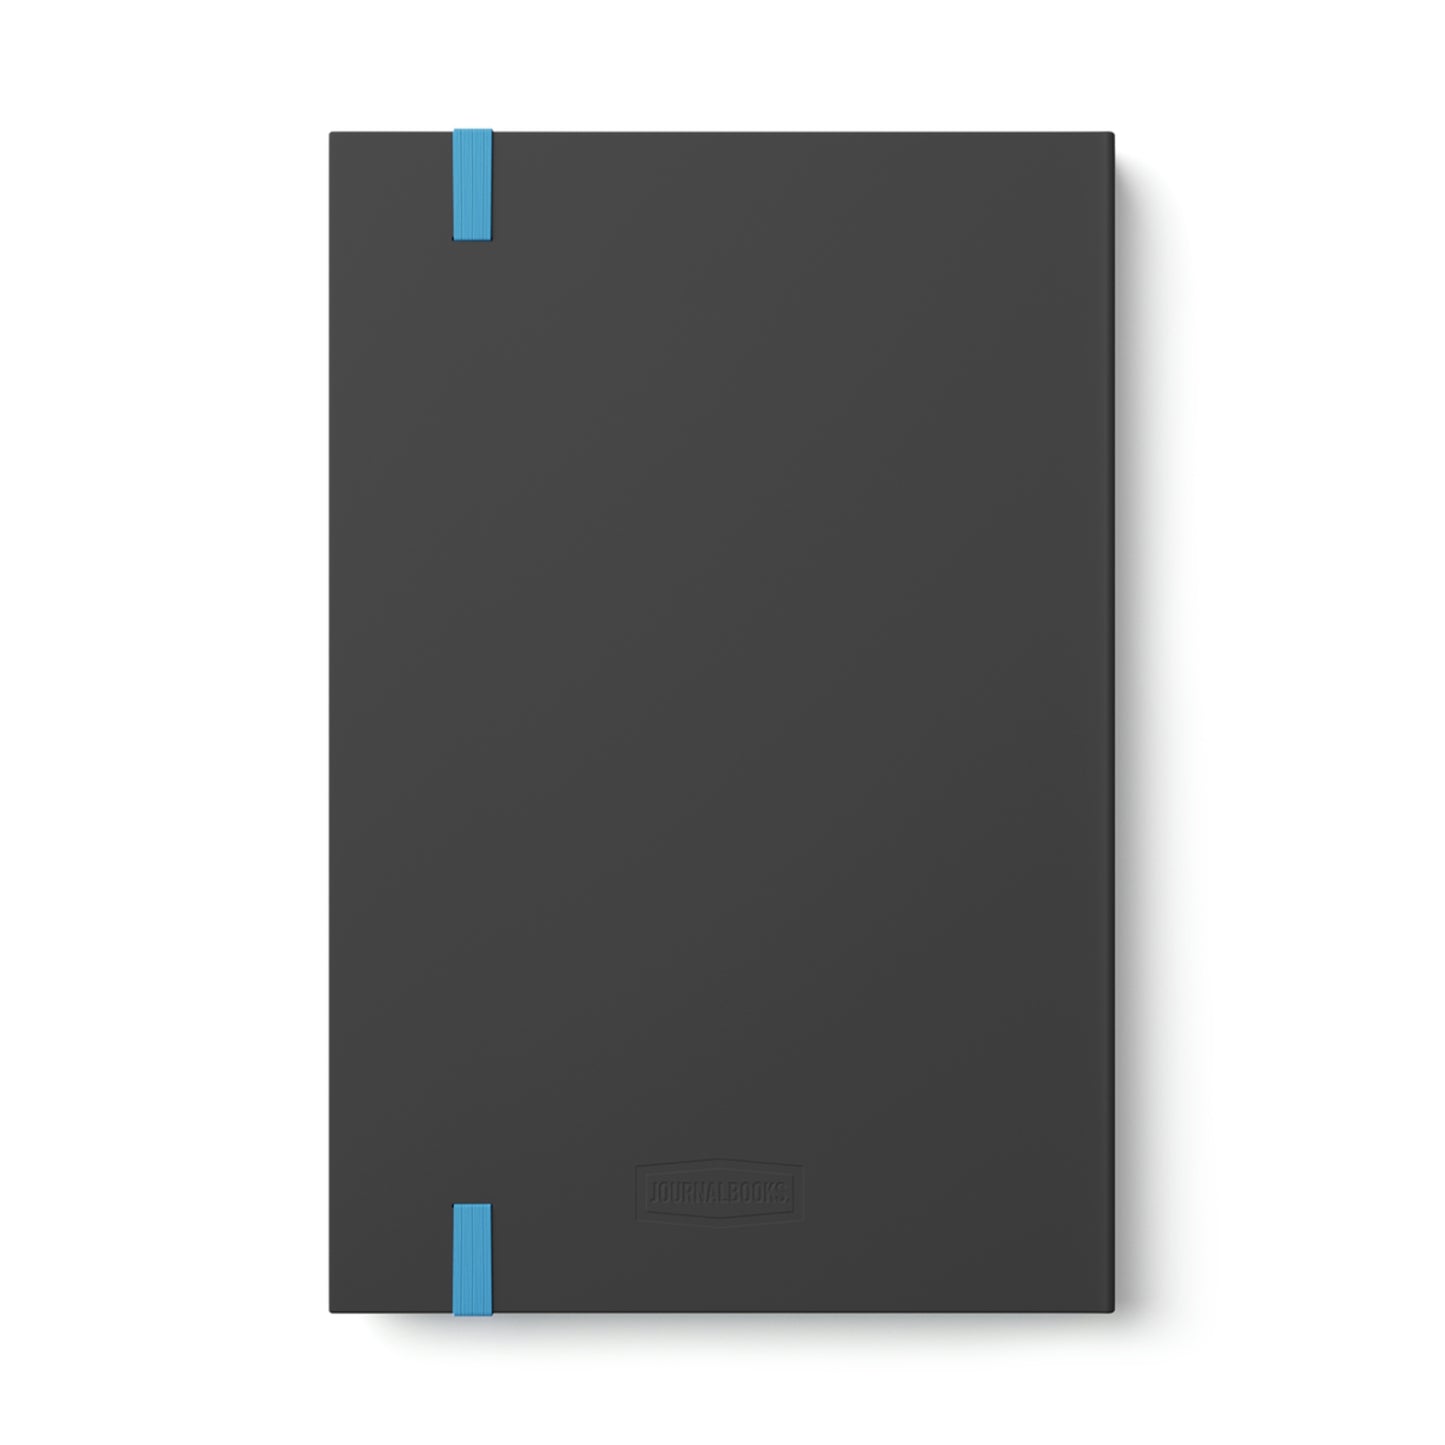 Brokers and Booze Podcast Color Contrast Notebook - Ruled